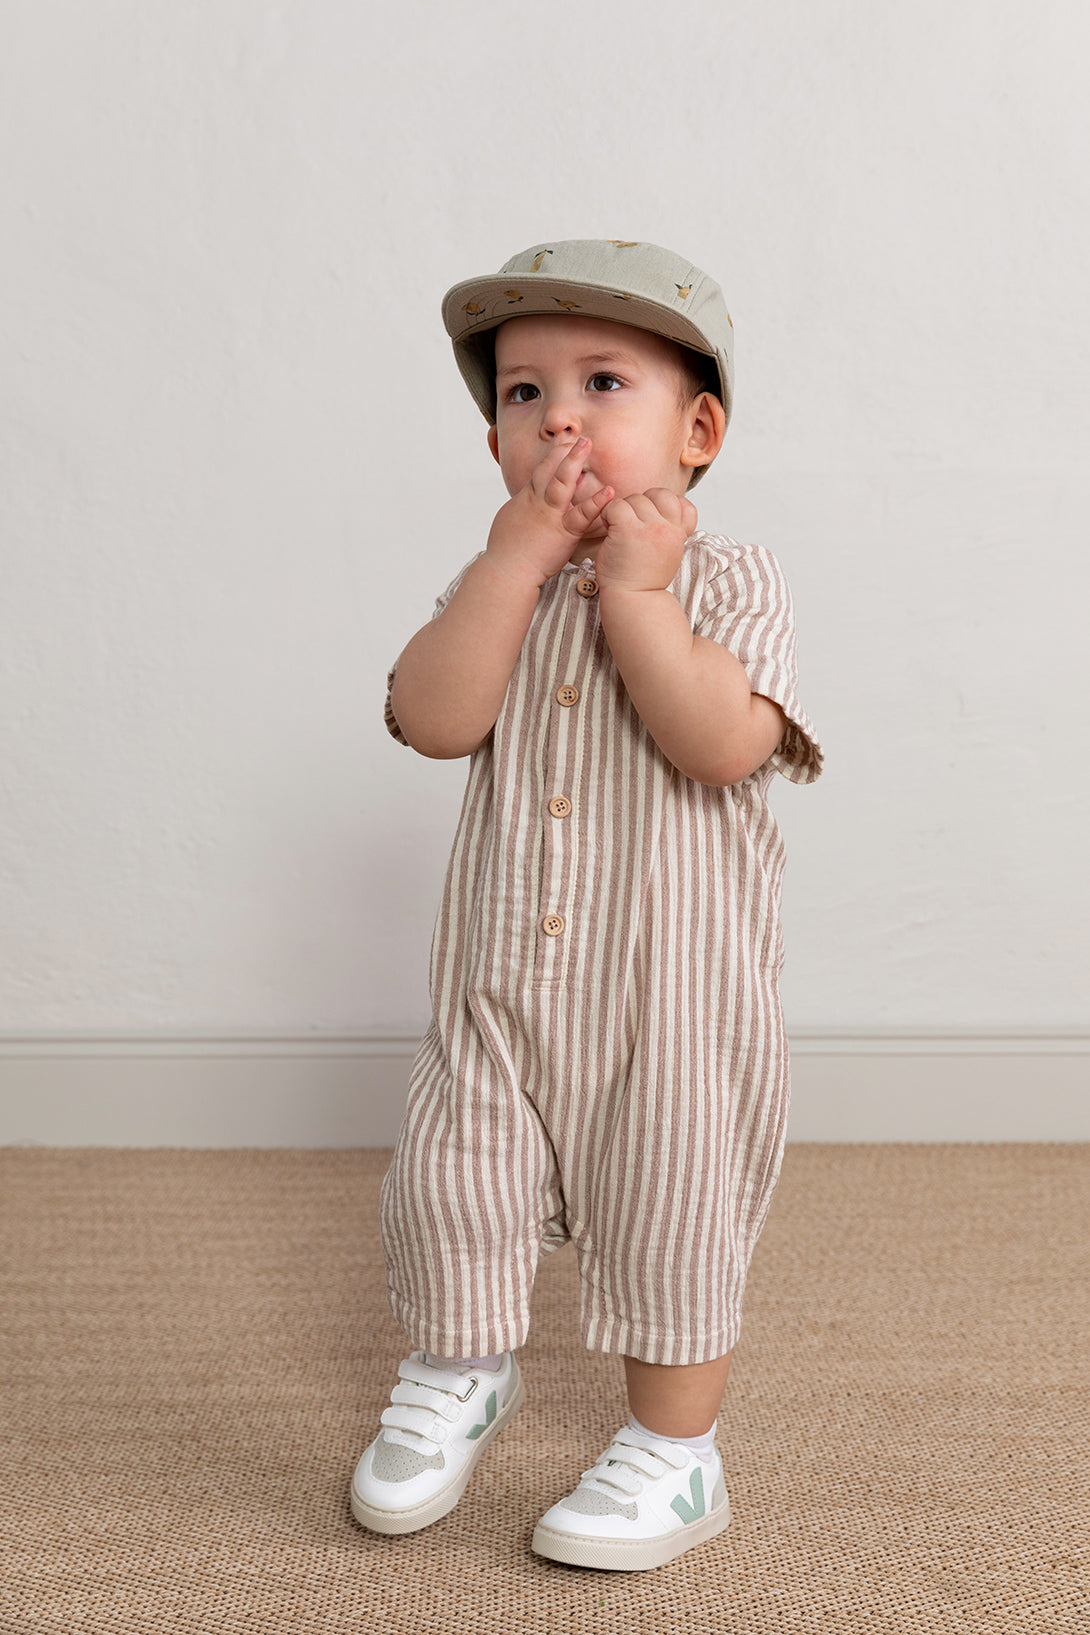 【garbo&friends】【30%OFF】Stripe summer onesize ロンパース 2-6m,6-12m  | Coucoubebe/ククベベ